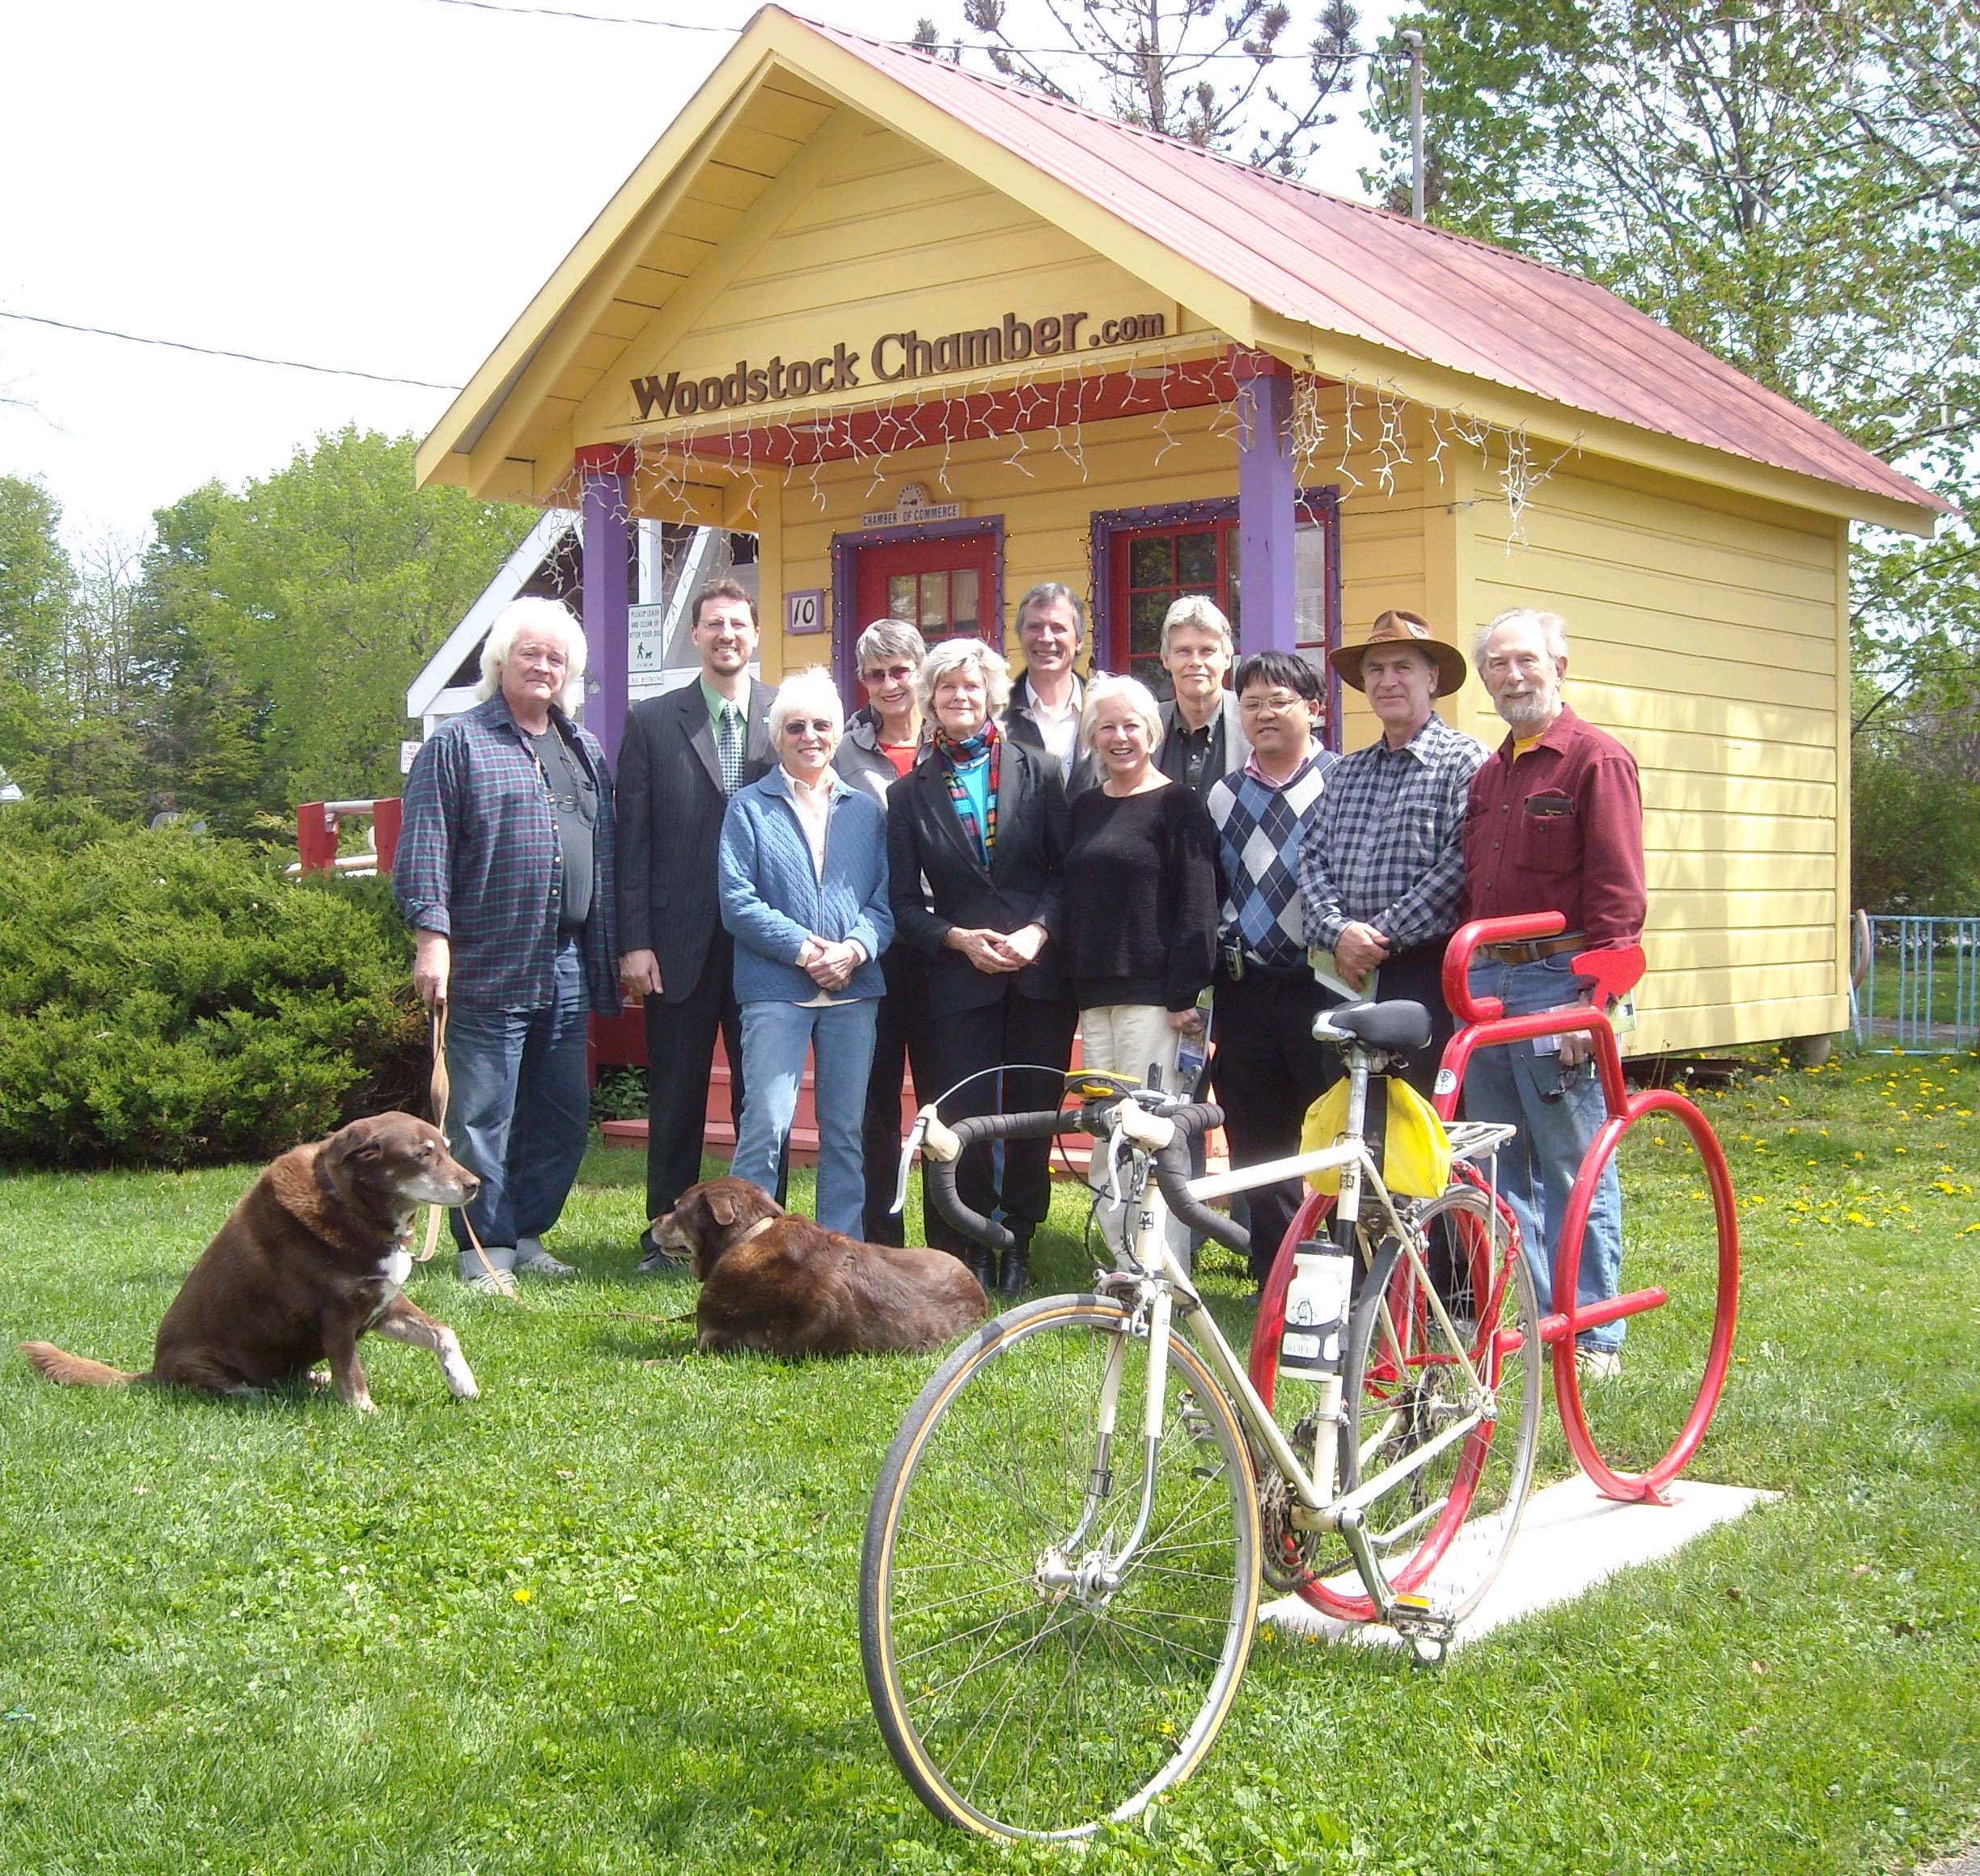 Members of the Woodstock Town Council and Chamber of Commerce with bike rack on 4/22/10